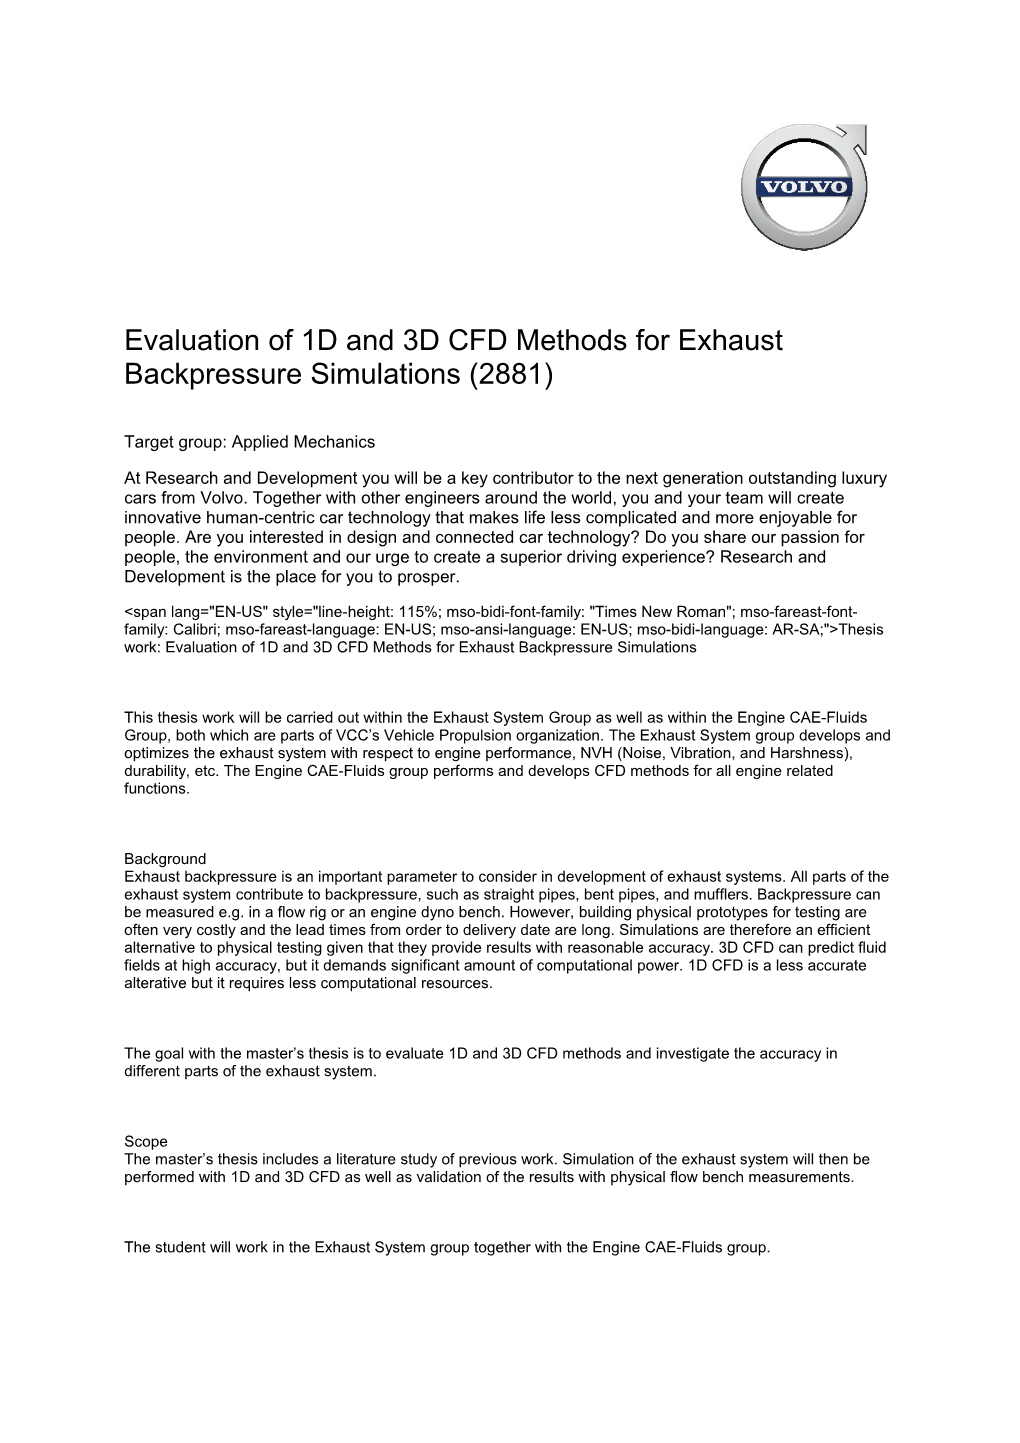 Evaluation of 1D and 3D CFD Methods for Exhaust Backpressure Simulations (2881)